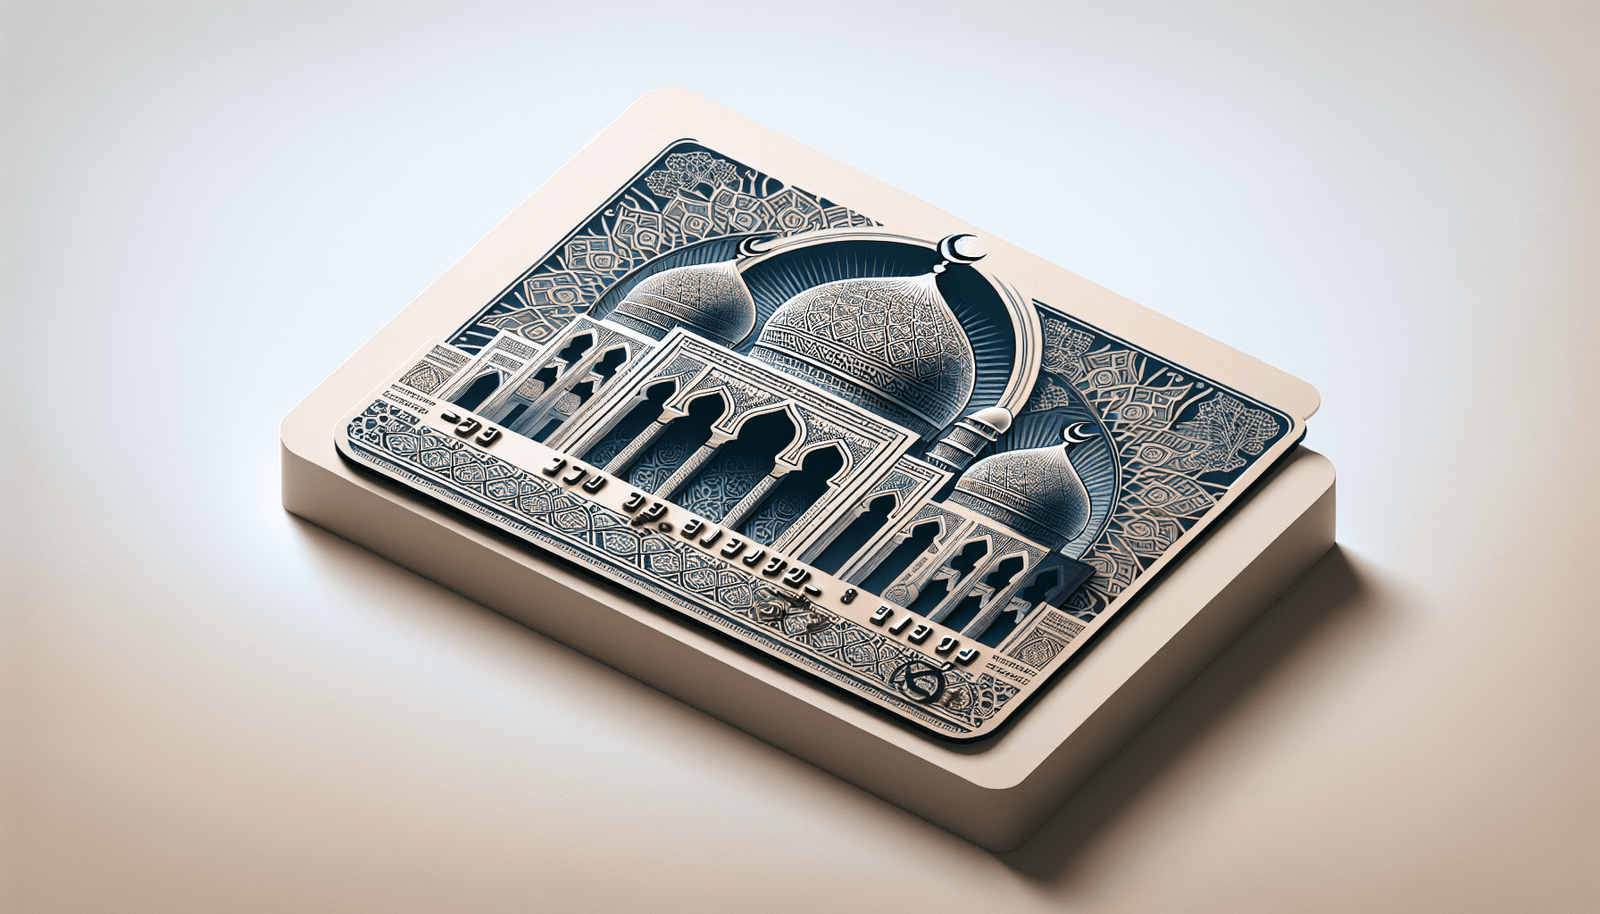 A Step-by-Step Guide To Finding The Best Islamic Credit Card In Malaysia